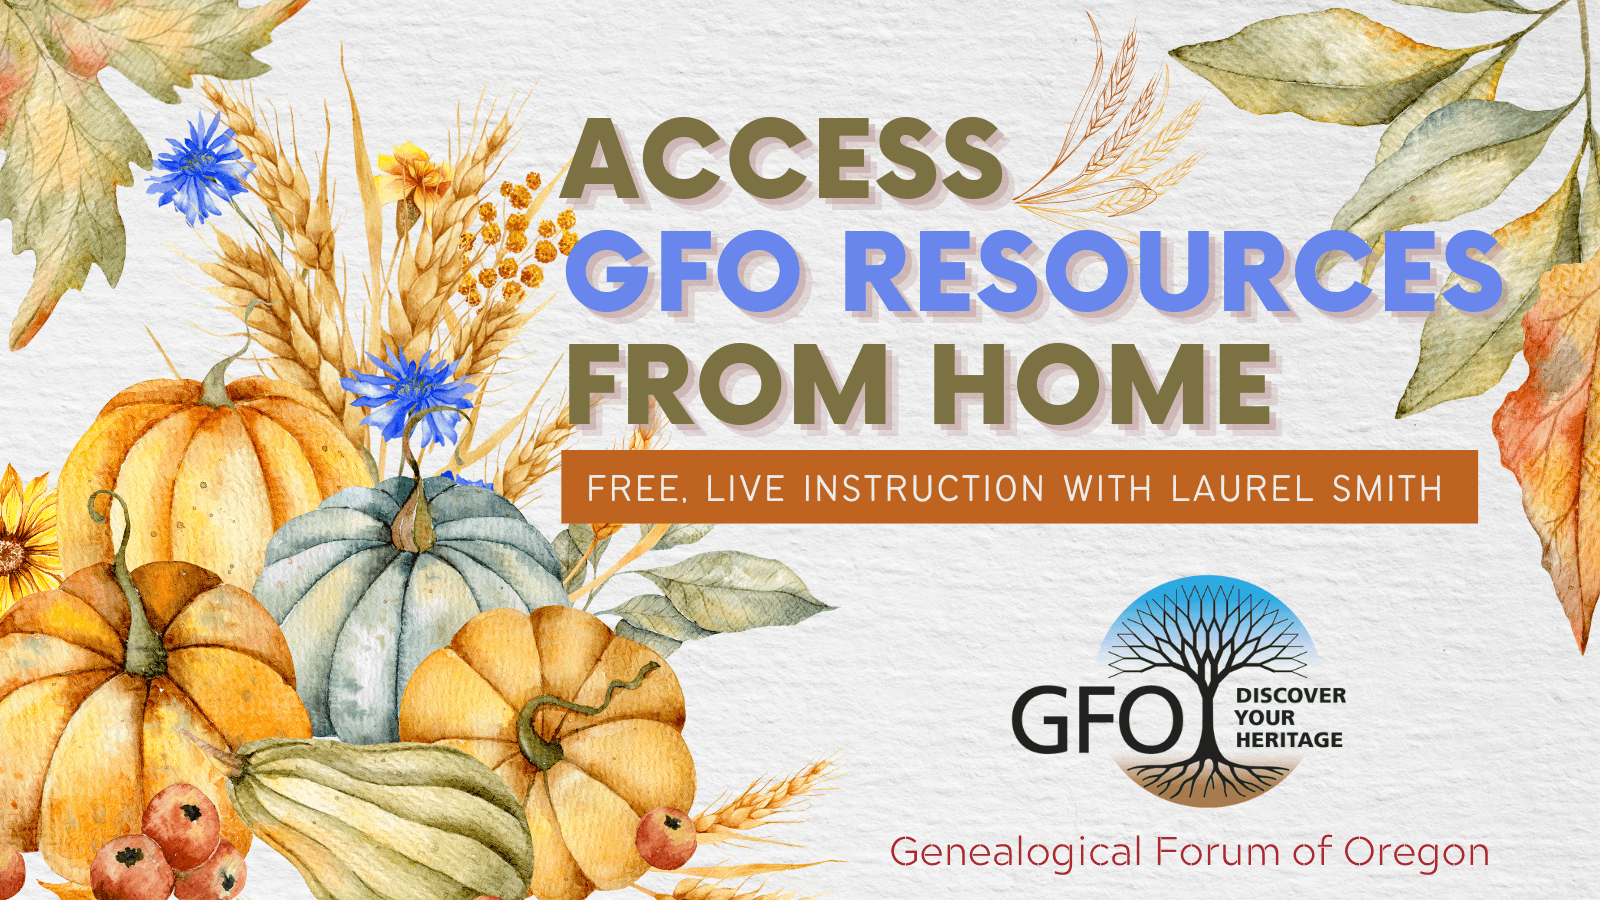 Access GFO Member Resources from Home - FREE